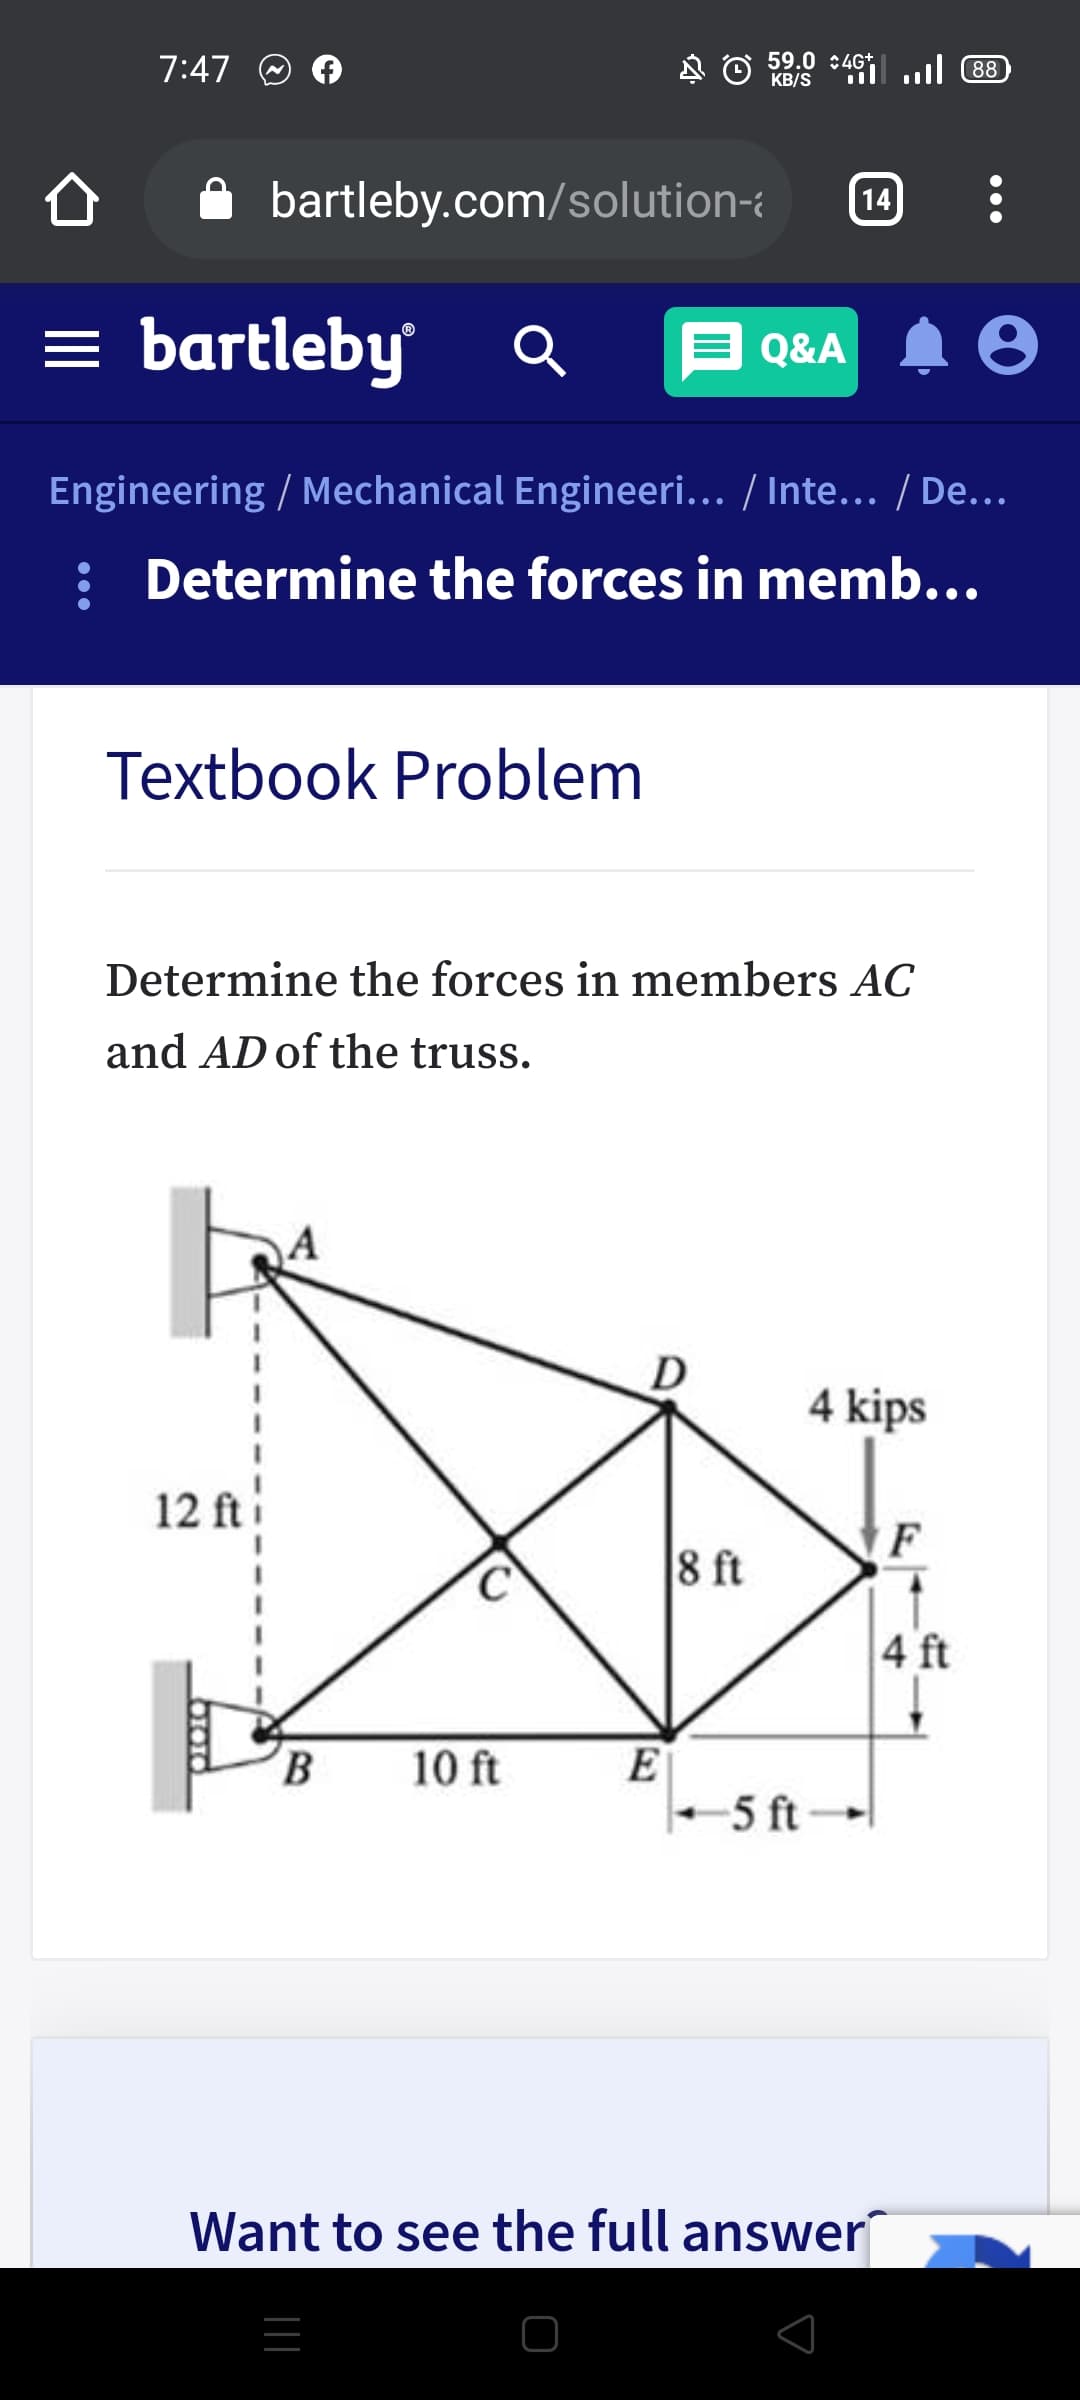 7:47
59.0 :4G+
KB/S
il ul 88
bartleby.com/solution-
14
= bartleby
Q&A A 8
Engineering / Mechanical Engineeri... / Inte... / De...
Determine the forces in memb...
Textbook Problem
Determine the forces in members AC
and AD of the truss.
D
4 kips
12 ft
F
8 ft
C.
4 ft
B
10 ft
-5 ft-
Want to see the full answer
